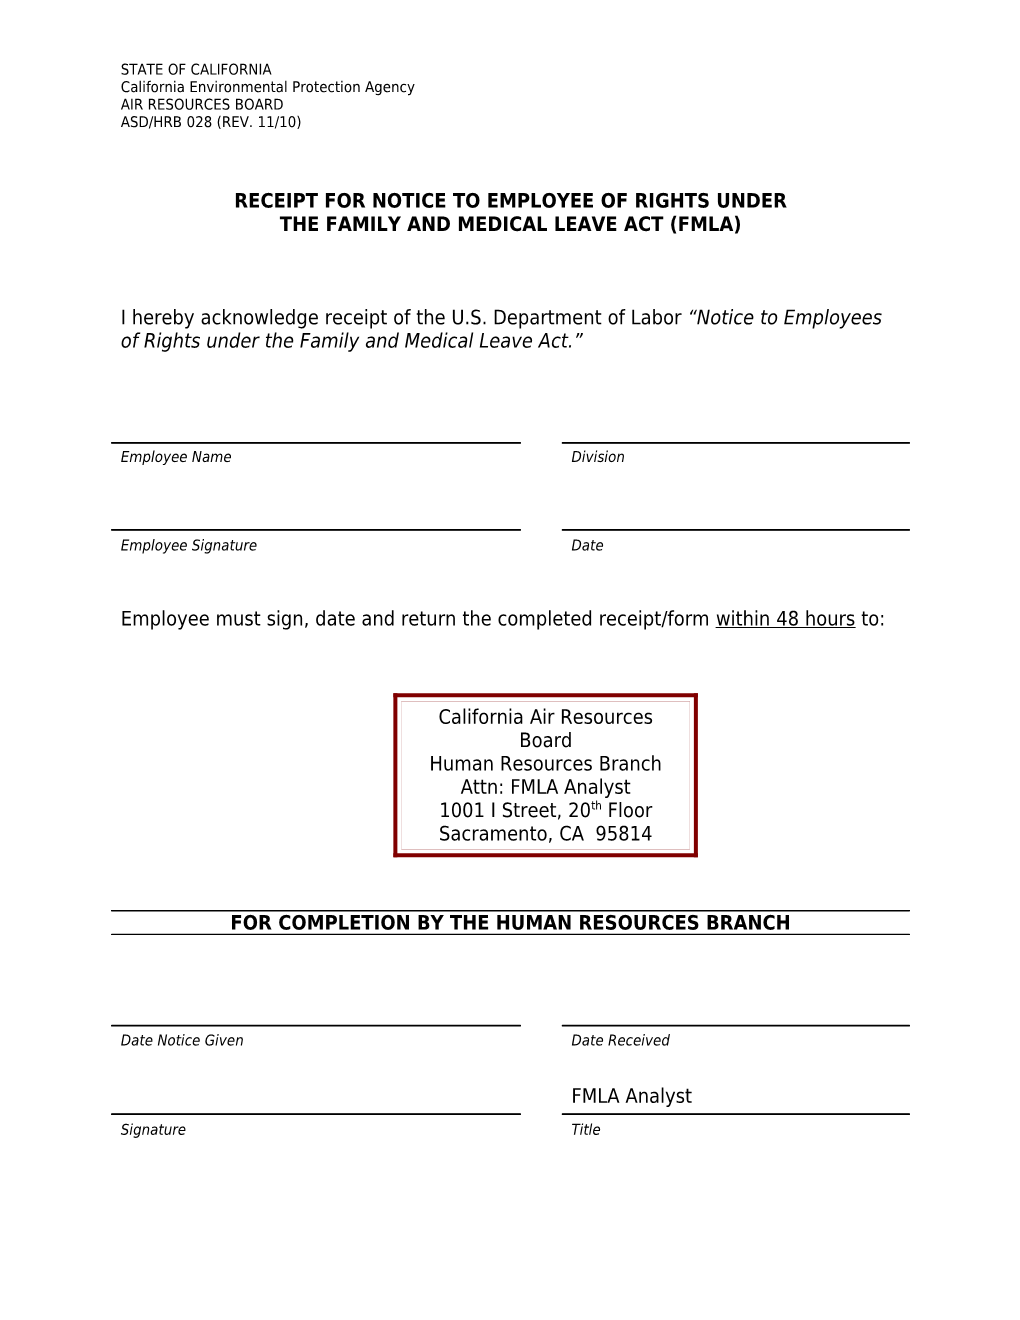 Forms: Receipt For Ntoice To Employee Of Rights Under The Family And Medical Leave Act (FMLA)